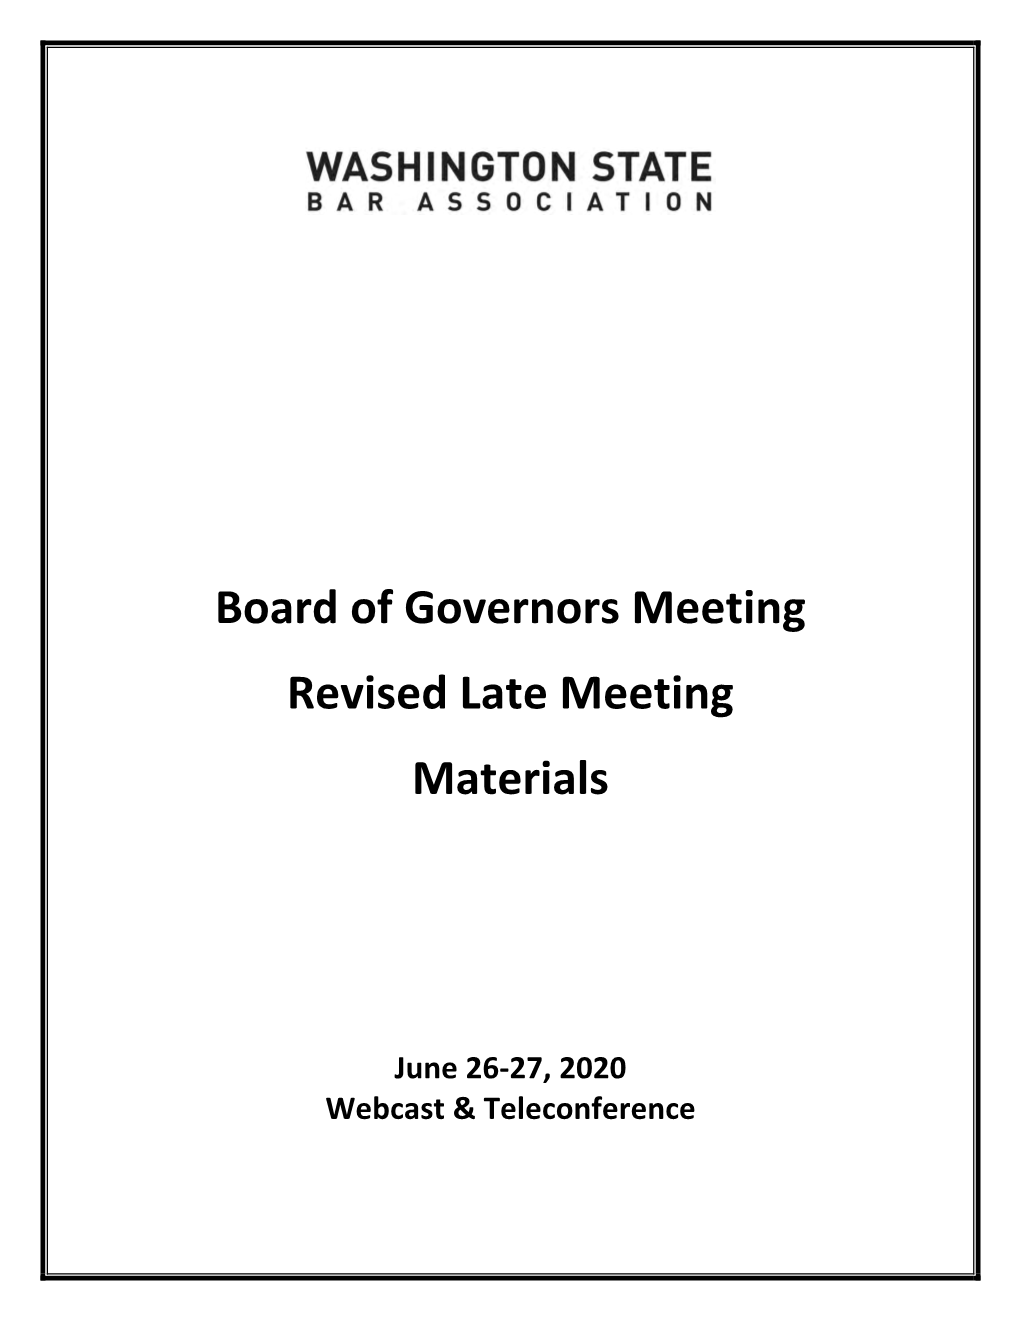 Board of Governors Meeting Revised Late Meeting Materials